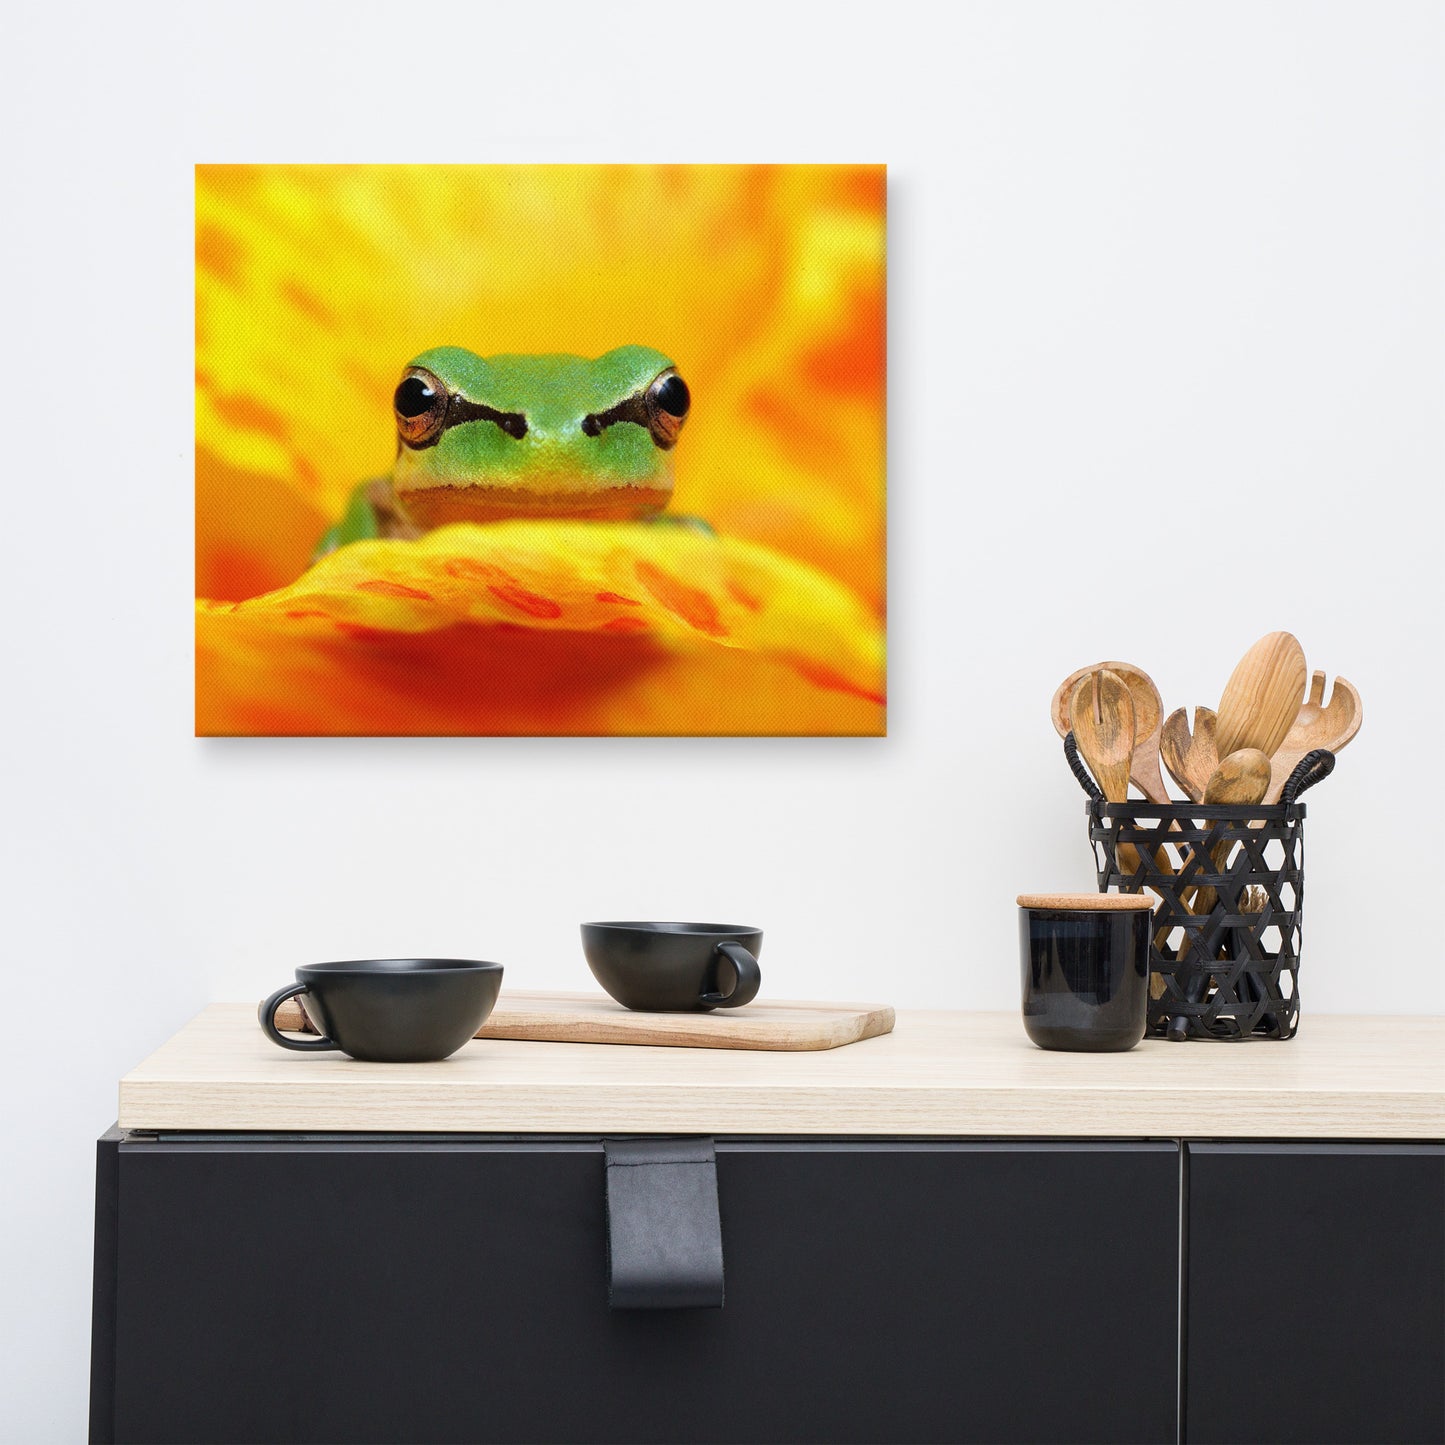 Hyla Green Frog on Yellow and Orange Flower Petals Wildlife Nature Photo Canvas Wall Art Print